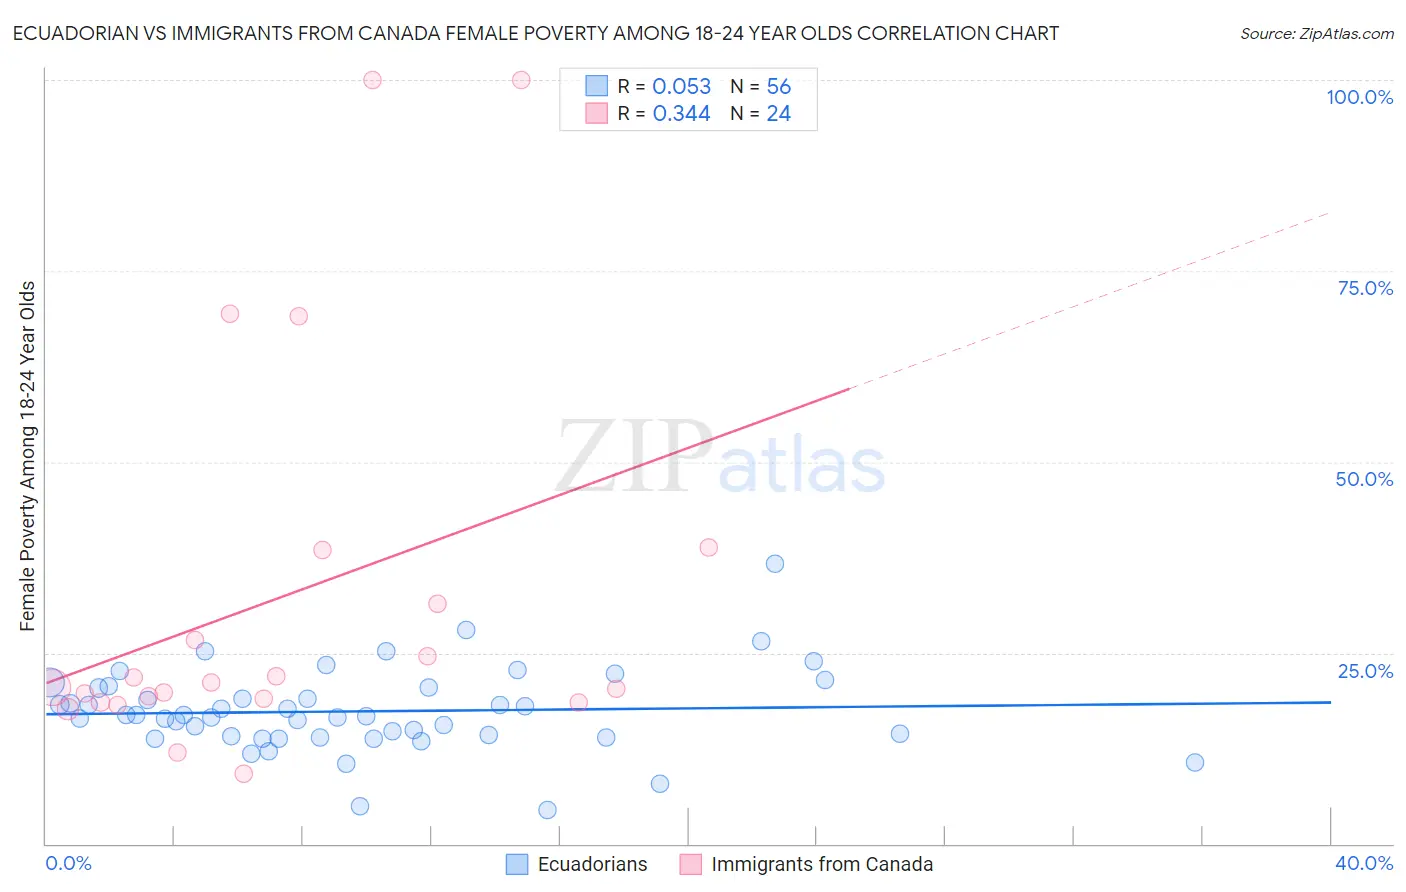 Ecuadorian vs Immigrants from Canada Female Poverty Among 18-24 Year Olds